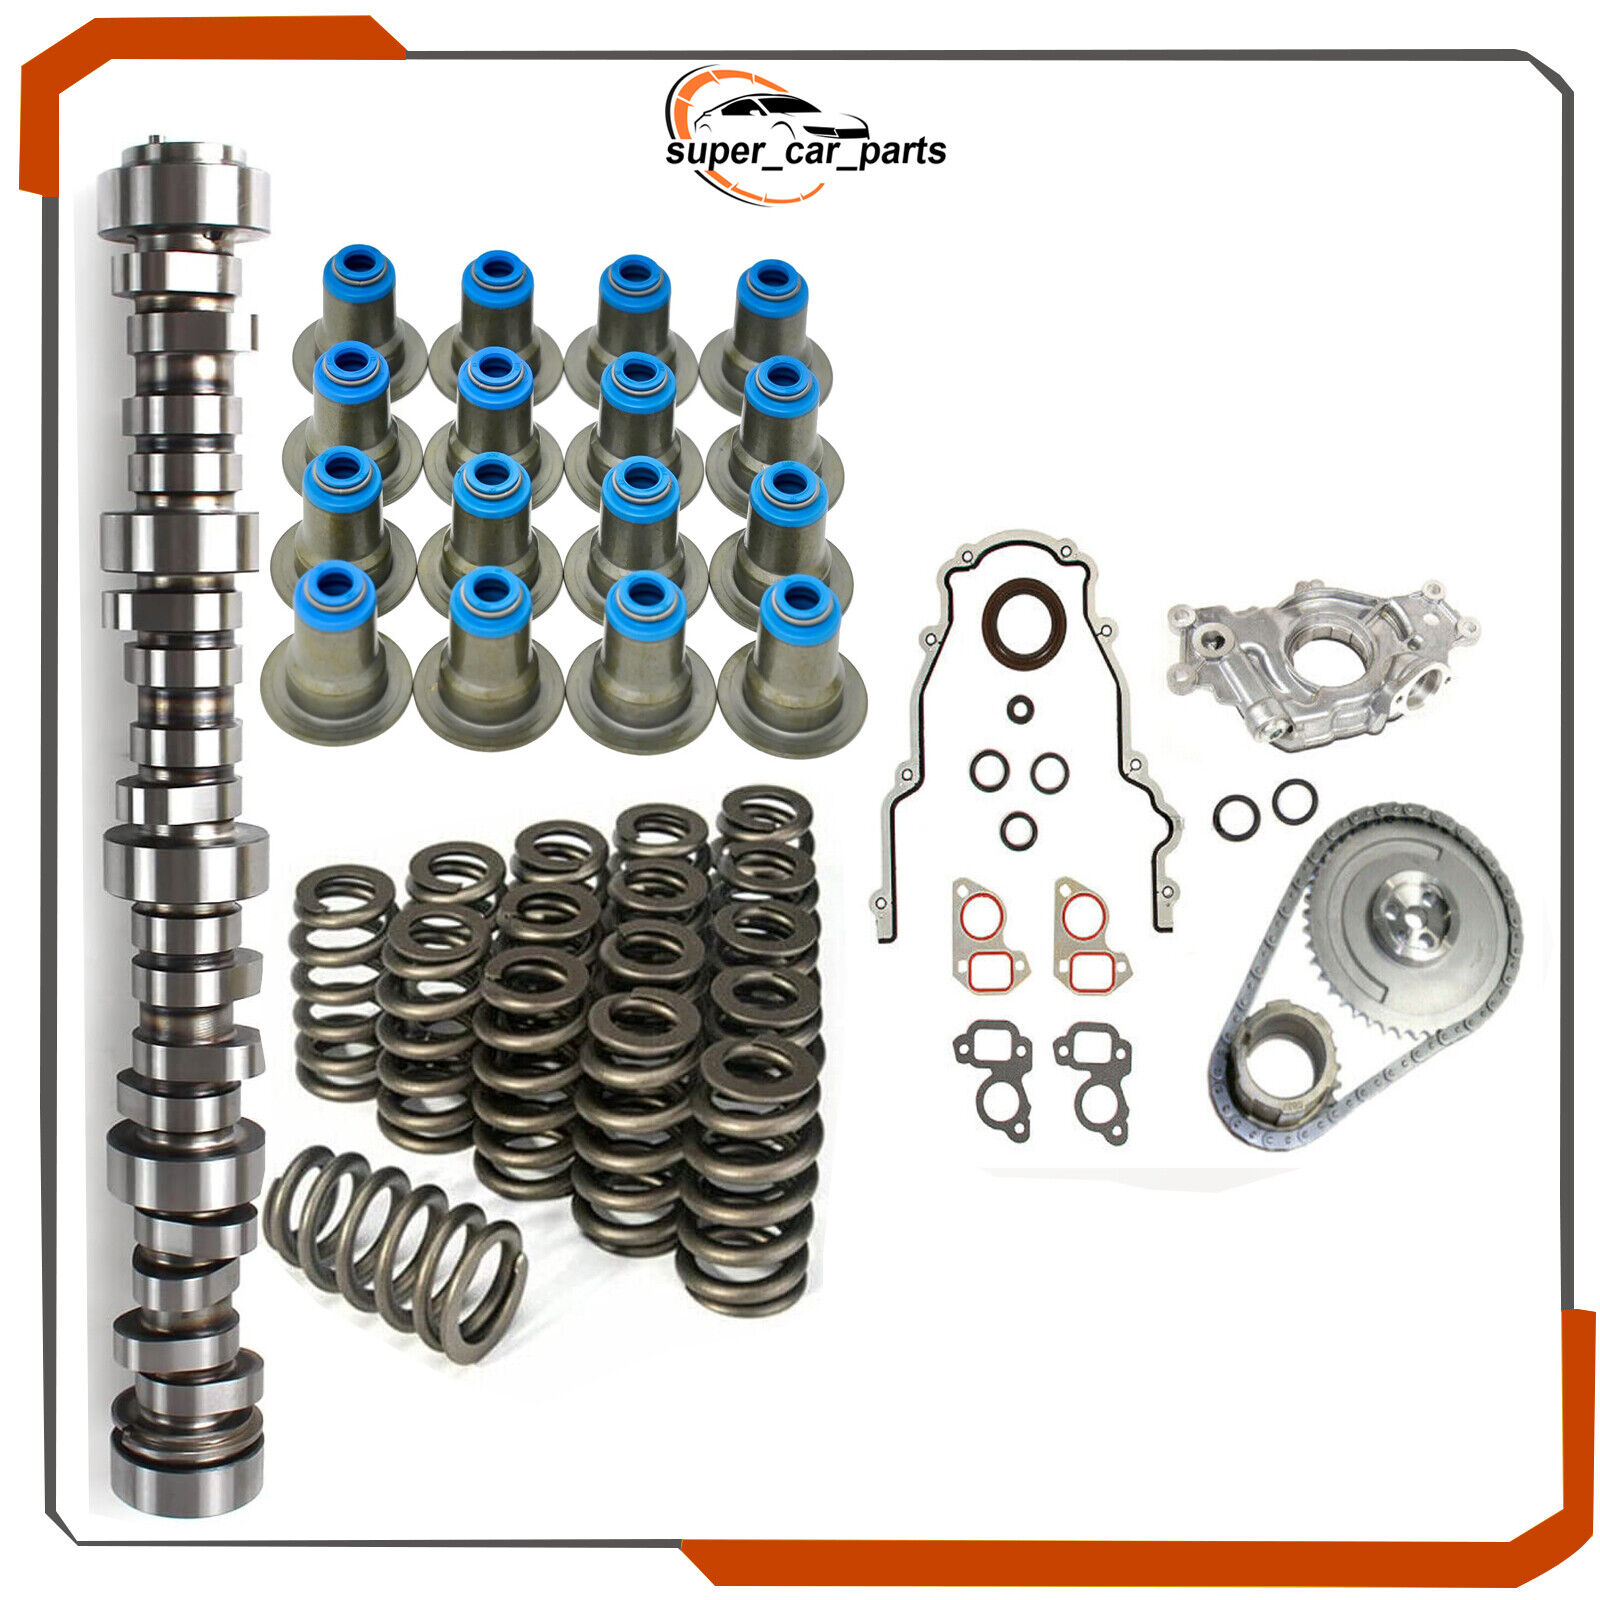 Sloppy Stage 2 Camshaft Lifters Springs Kit E1840P Replacement for Chevy LS LS1